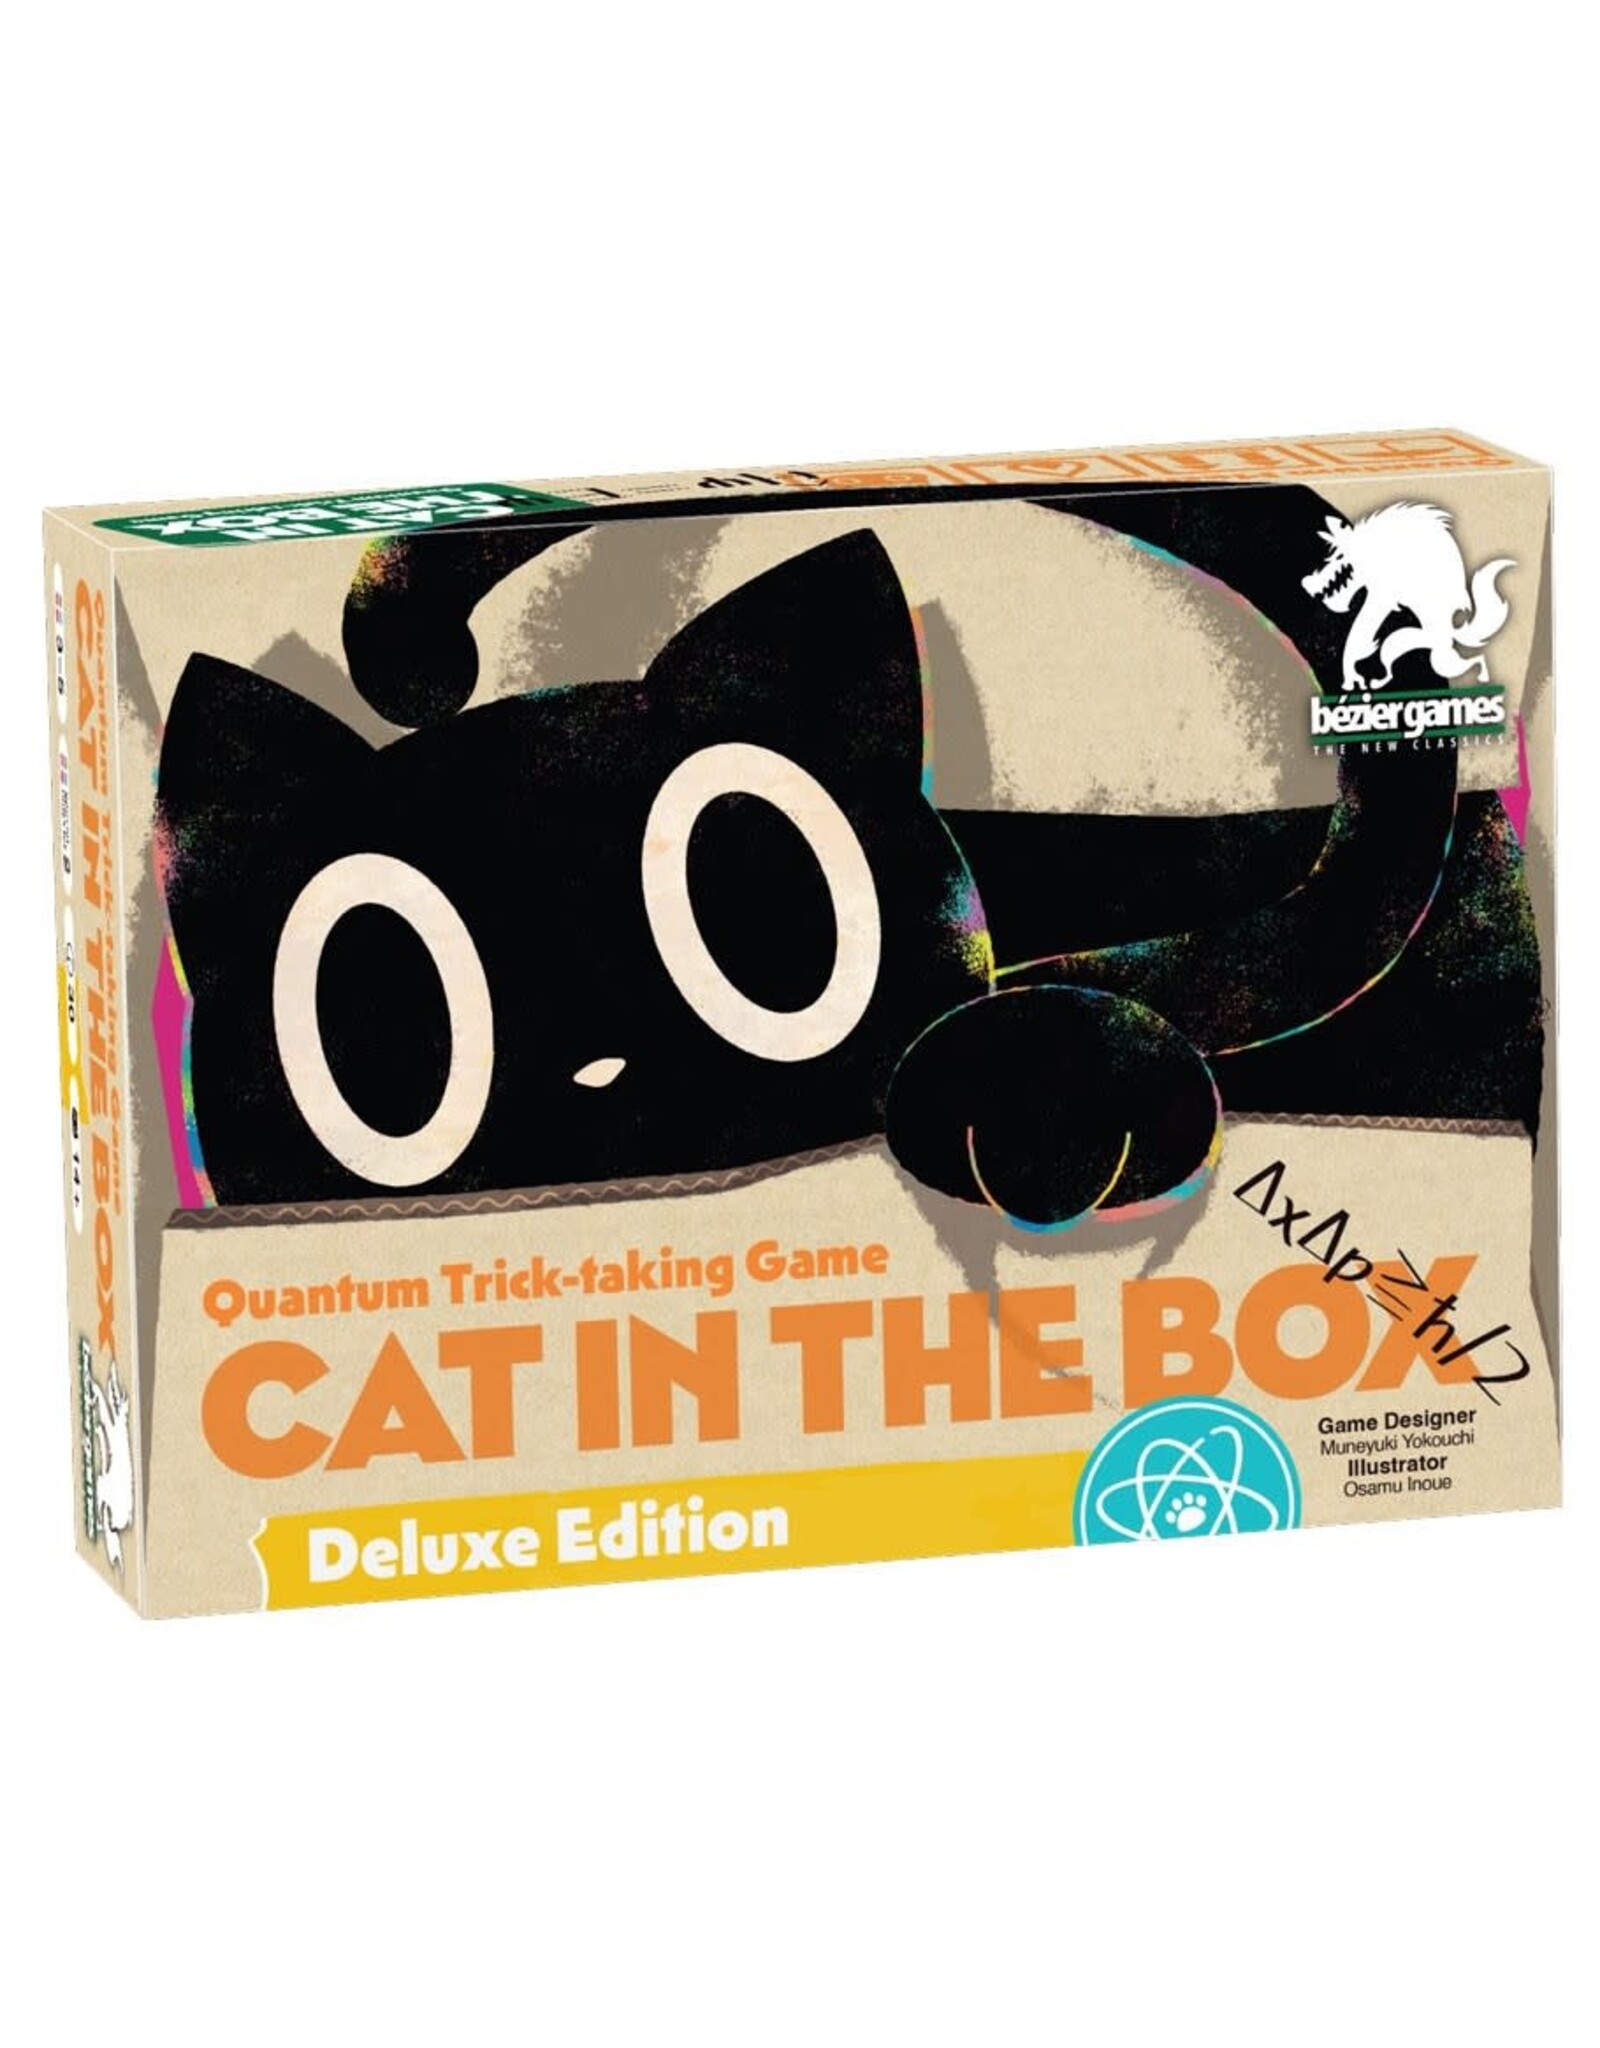 Bezier Games Cat in the Box: Deluxe Edition